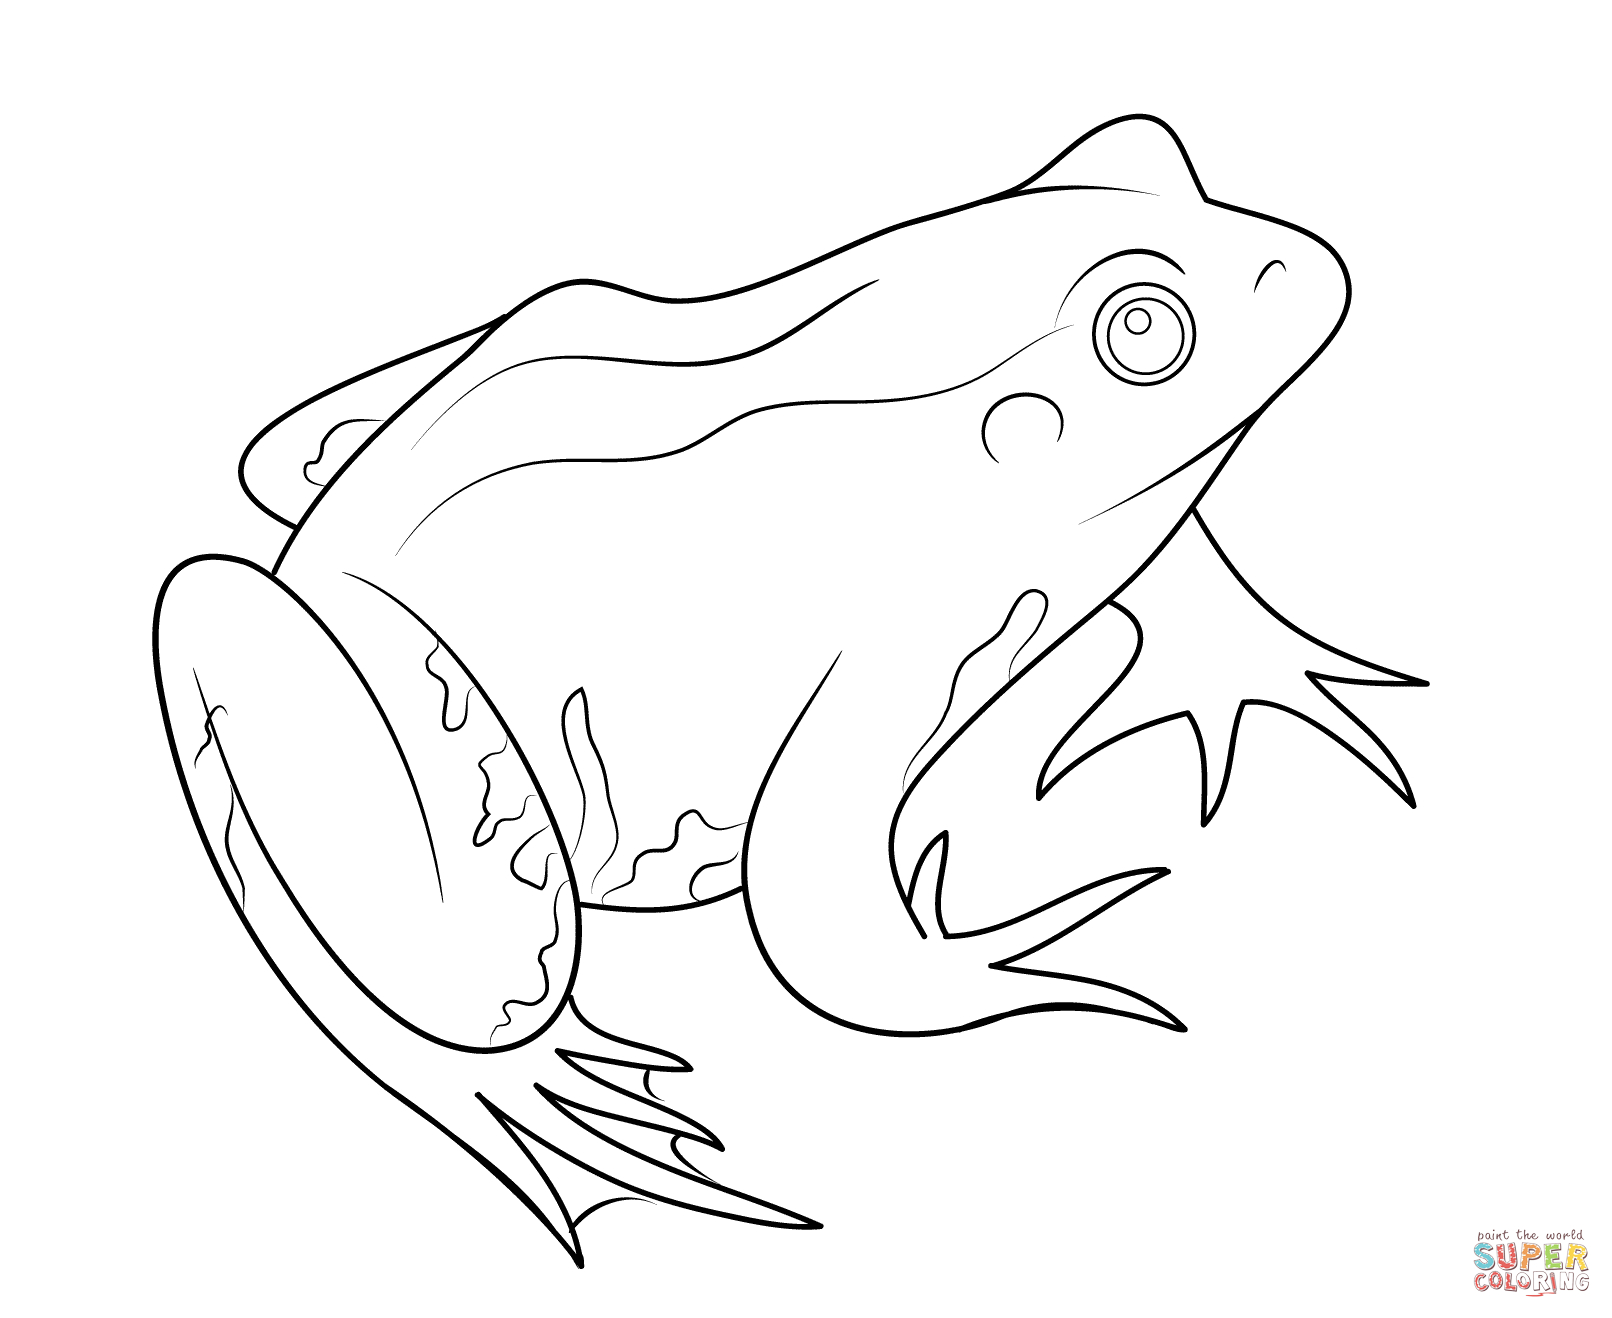 Rainforest Frog Coloring Page Frog Coloring Page Free Printable Coloring Pages